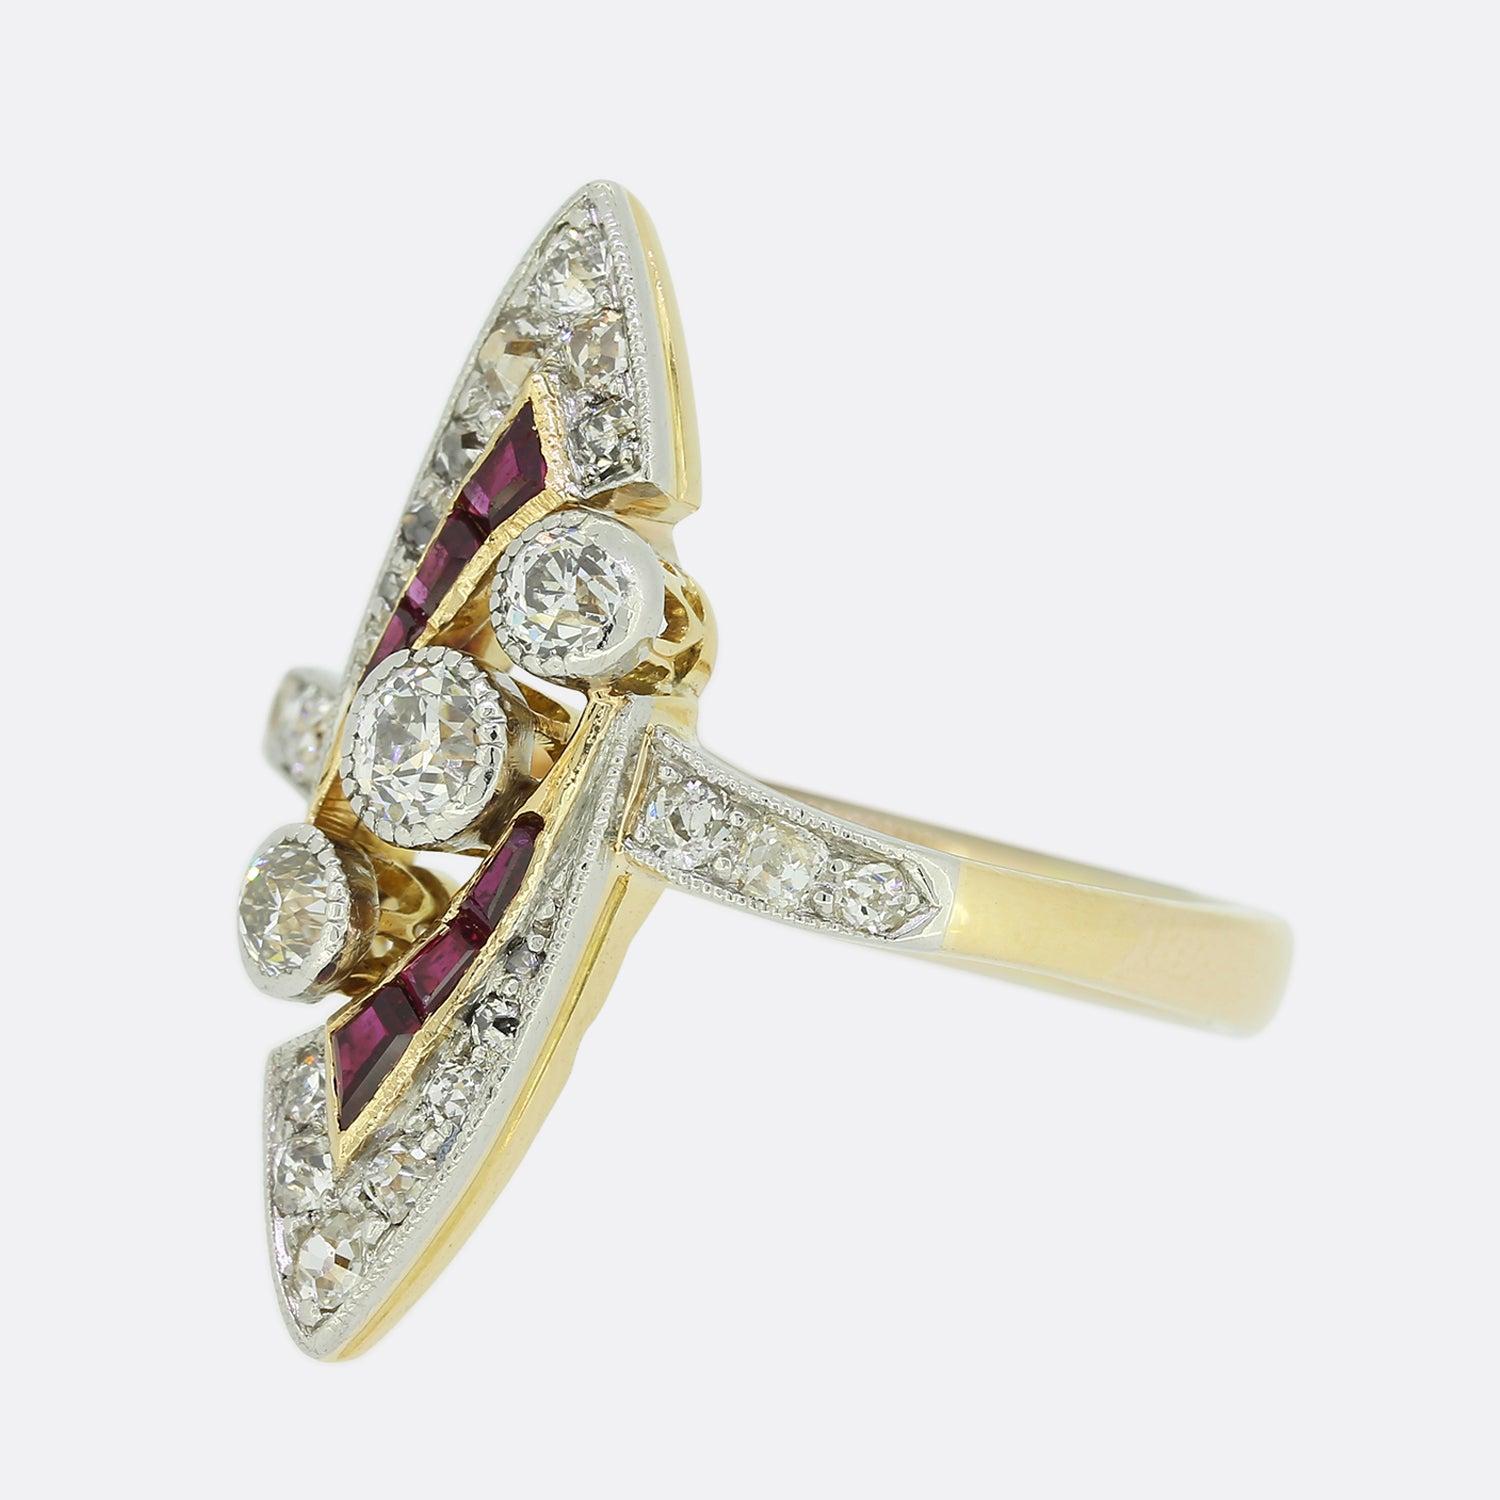 This is an impressive Art Deco ruby and diamond navette ring. At the centre of an open marquise-like shaped design we find three milgrain set old cut diamonds in a diagonal line formation. This fine detailed setting is continued around the entirety